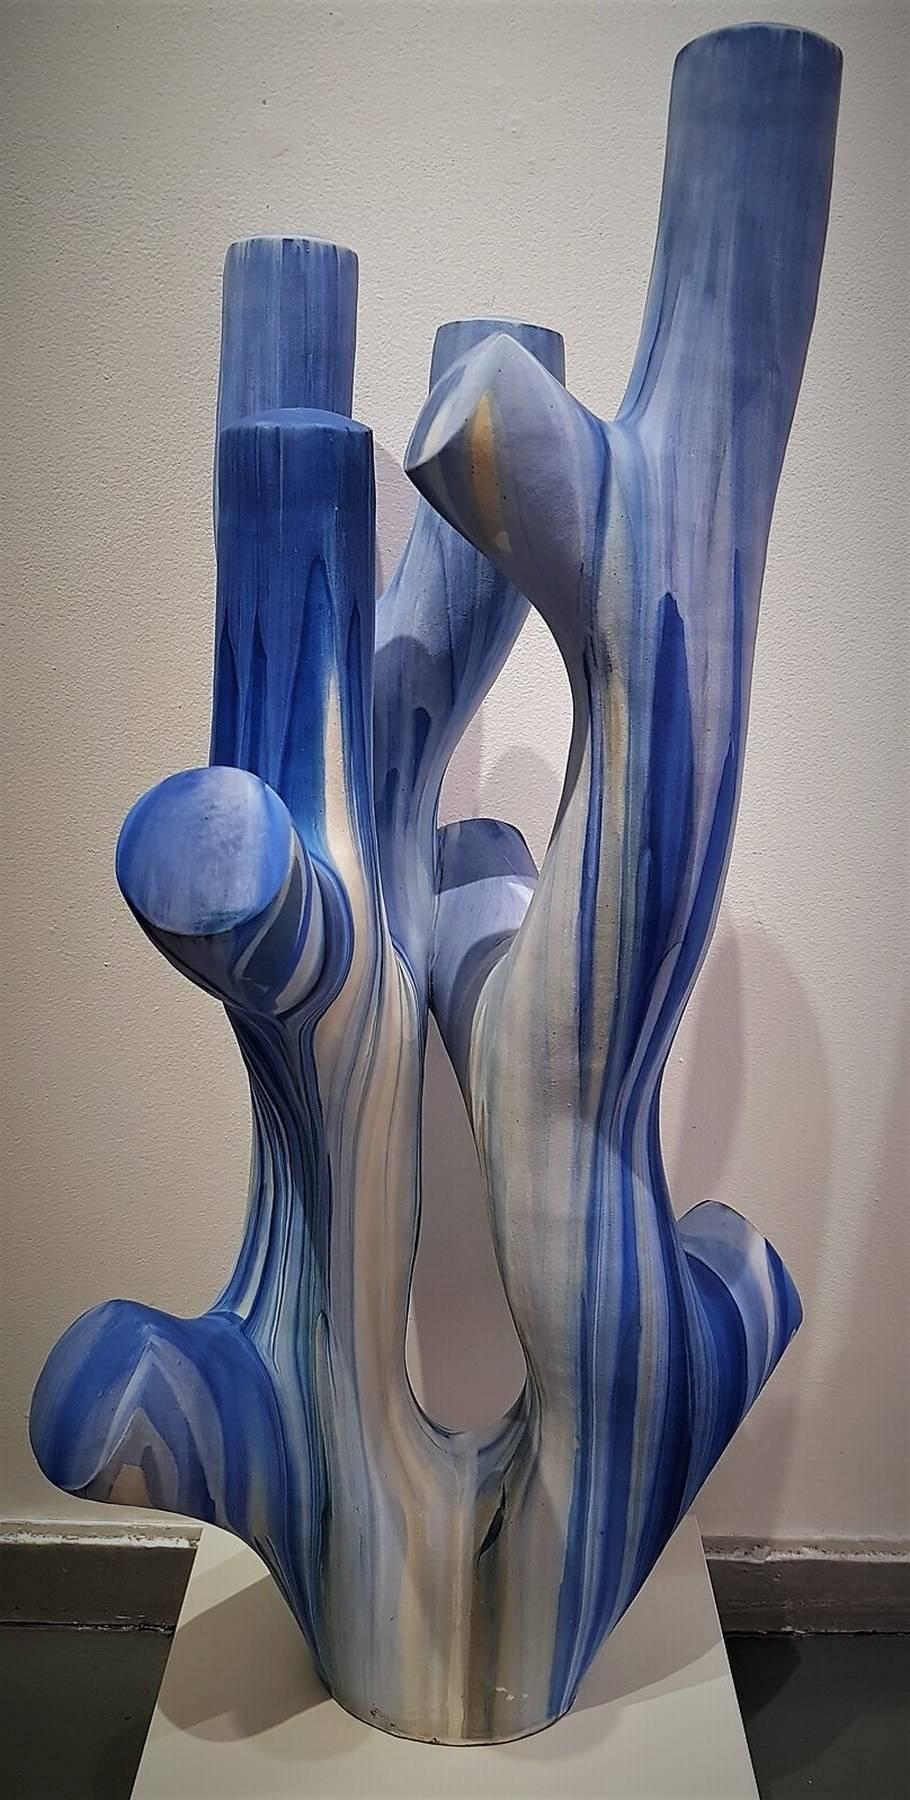 The Blue Wall - Sculpture by Trey Hill